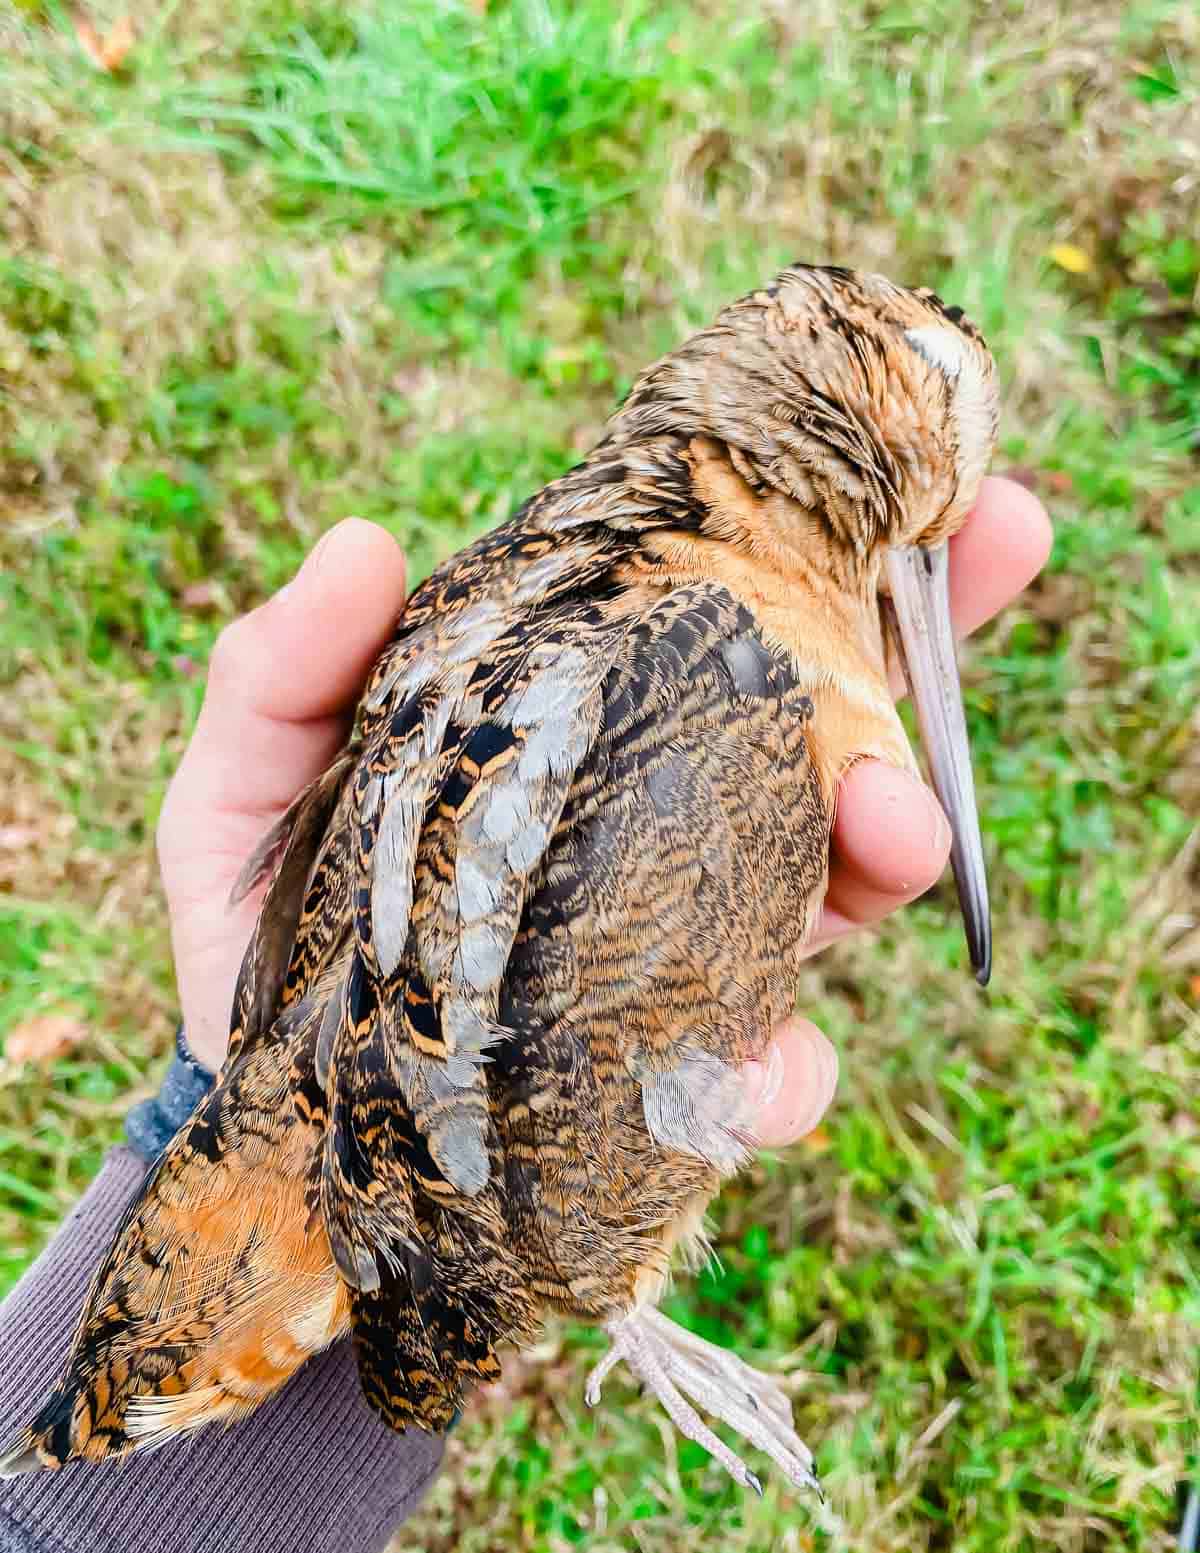 A person holding a woodcock bird in their hand.